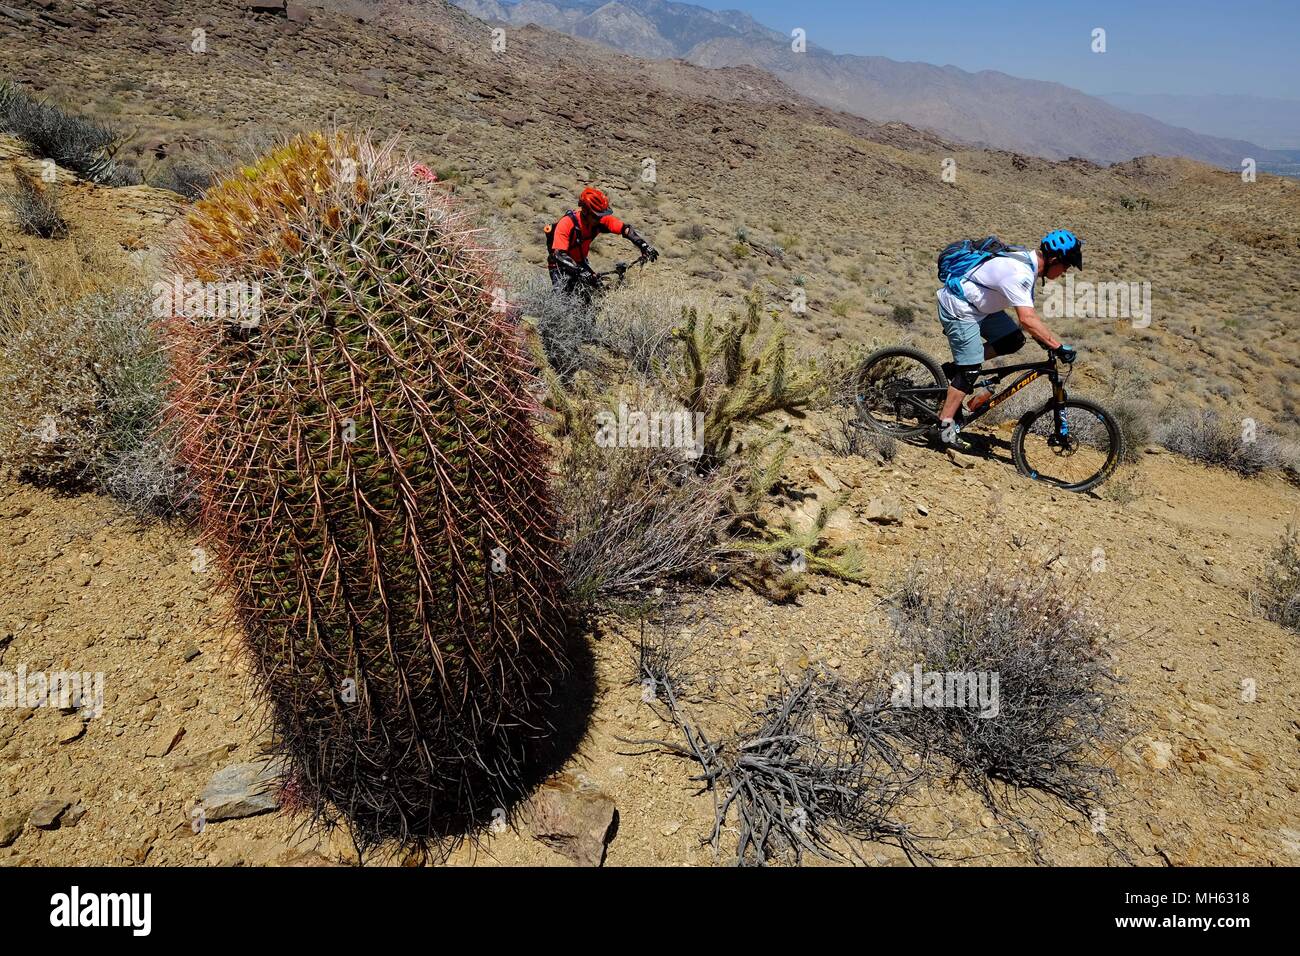 Palm Springs, California, USA. 28th Apr, 2018. Mountain bikers pass huge cactus and rocks on the trail. This is a true Southern California Epic mountain bike ride in the Santa Rosa and San Jacinto Mountains National Monument. Offering huge vistas, off-camber narrow single track, ridges, stream beds, rocks, sand, cactus. This point-to-point route passes a varied array of high desert trails from the foot of the north slope of Santa Rosa Mountains and Agua Caliente Indian Reservation at 4500 feet down to Palm Springs 29 miles away at 500 feet. Credit: Ruaridh Stewart/ZUMA Wire/Alamy Live News Stock Photo